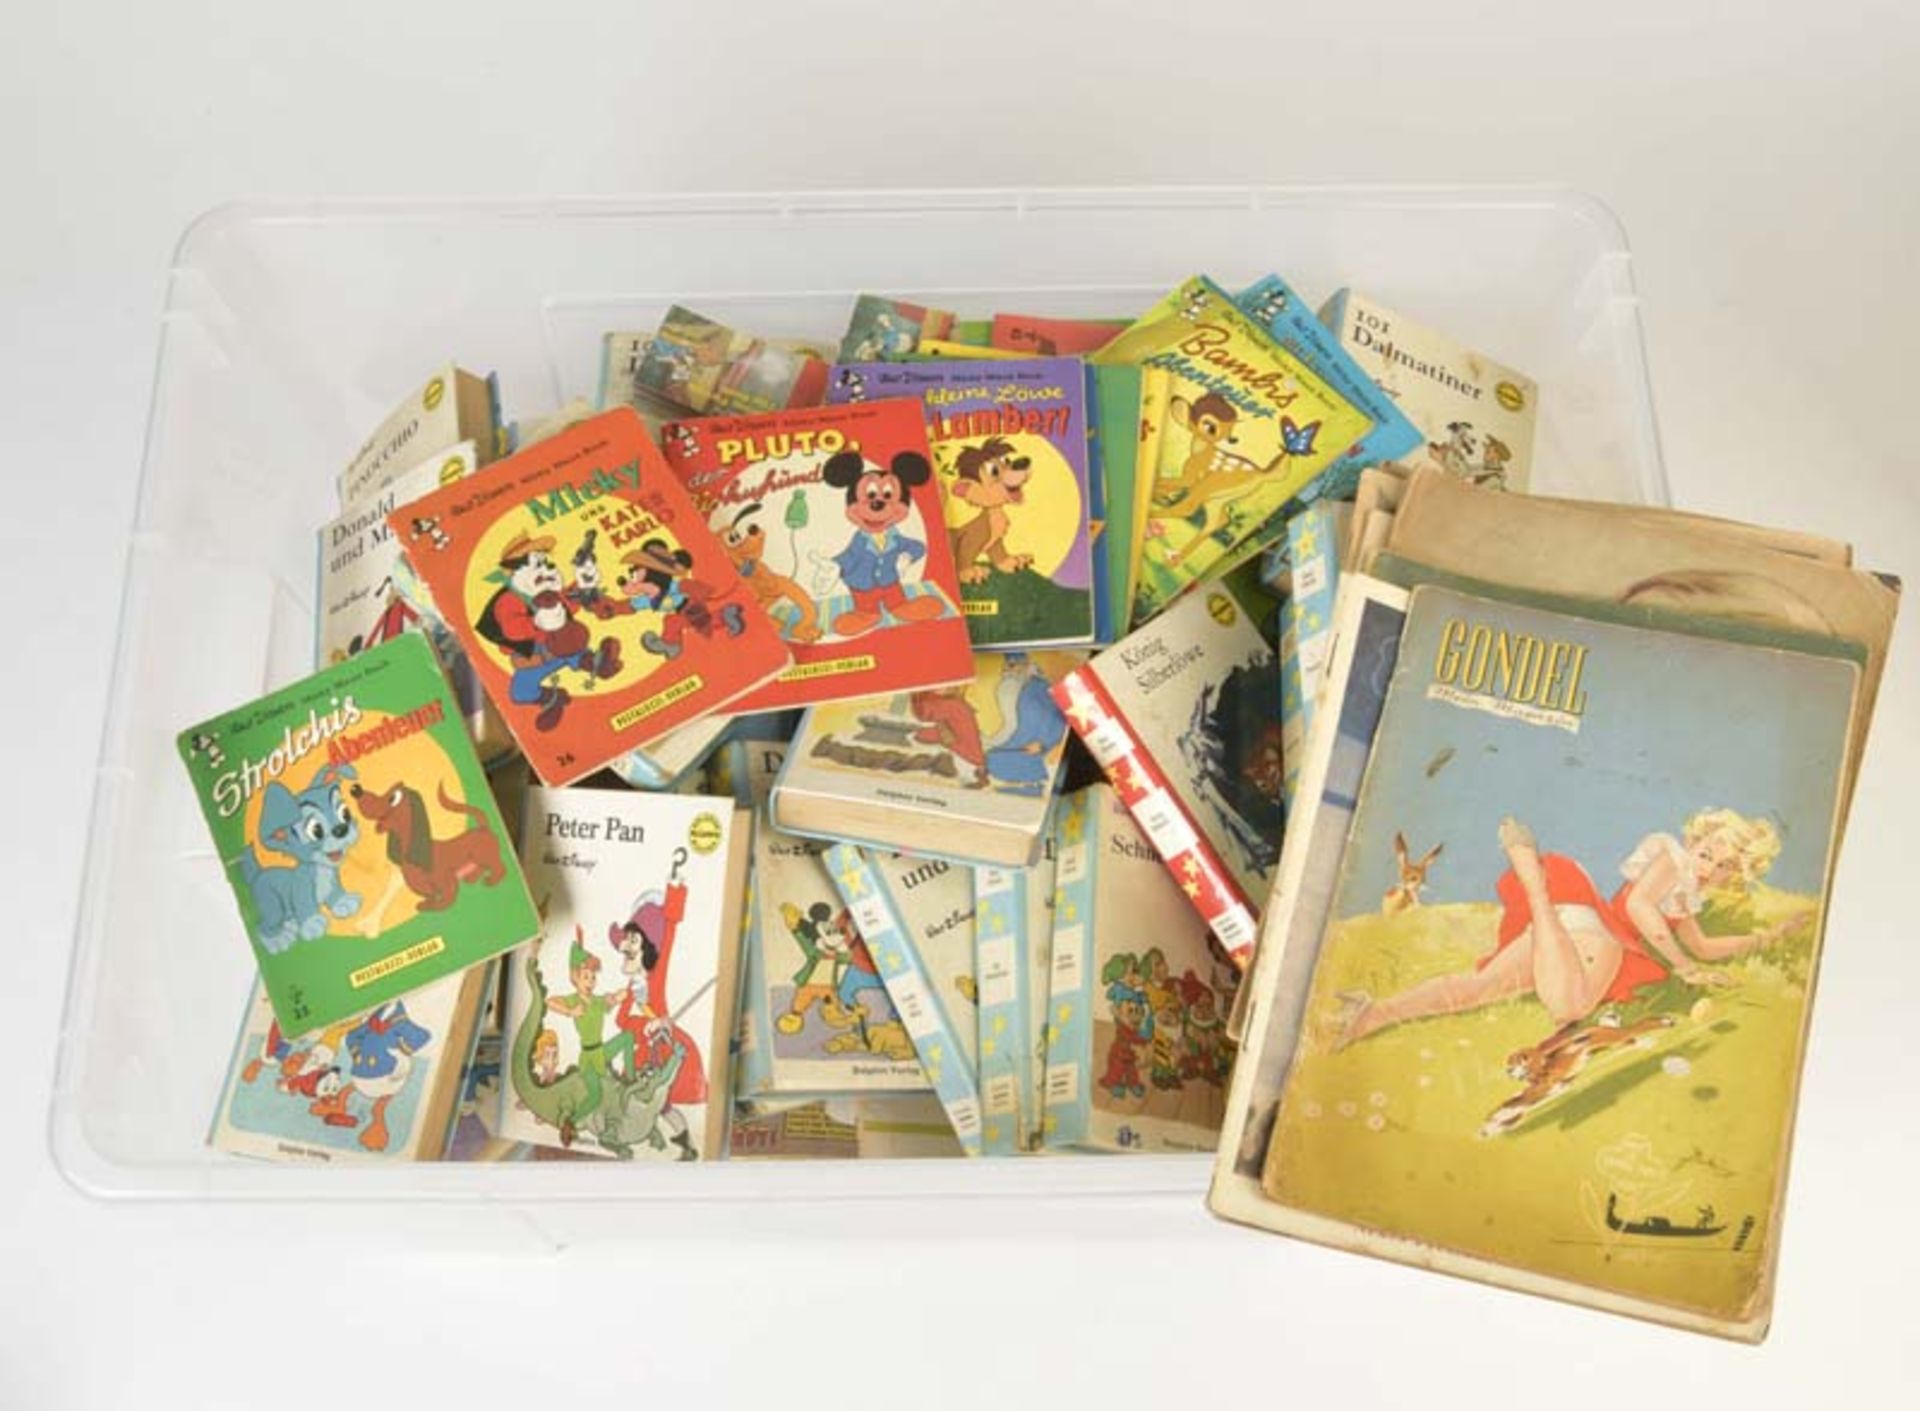 Around 200 Disney Books, Brouchures + Magazines, W.-Germany a.o., from several decades, treasure